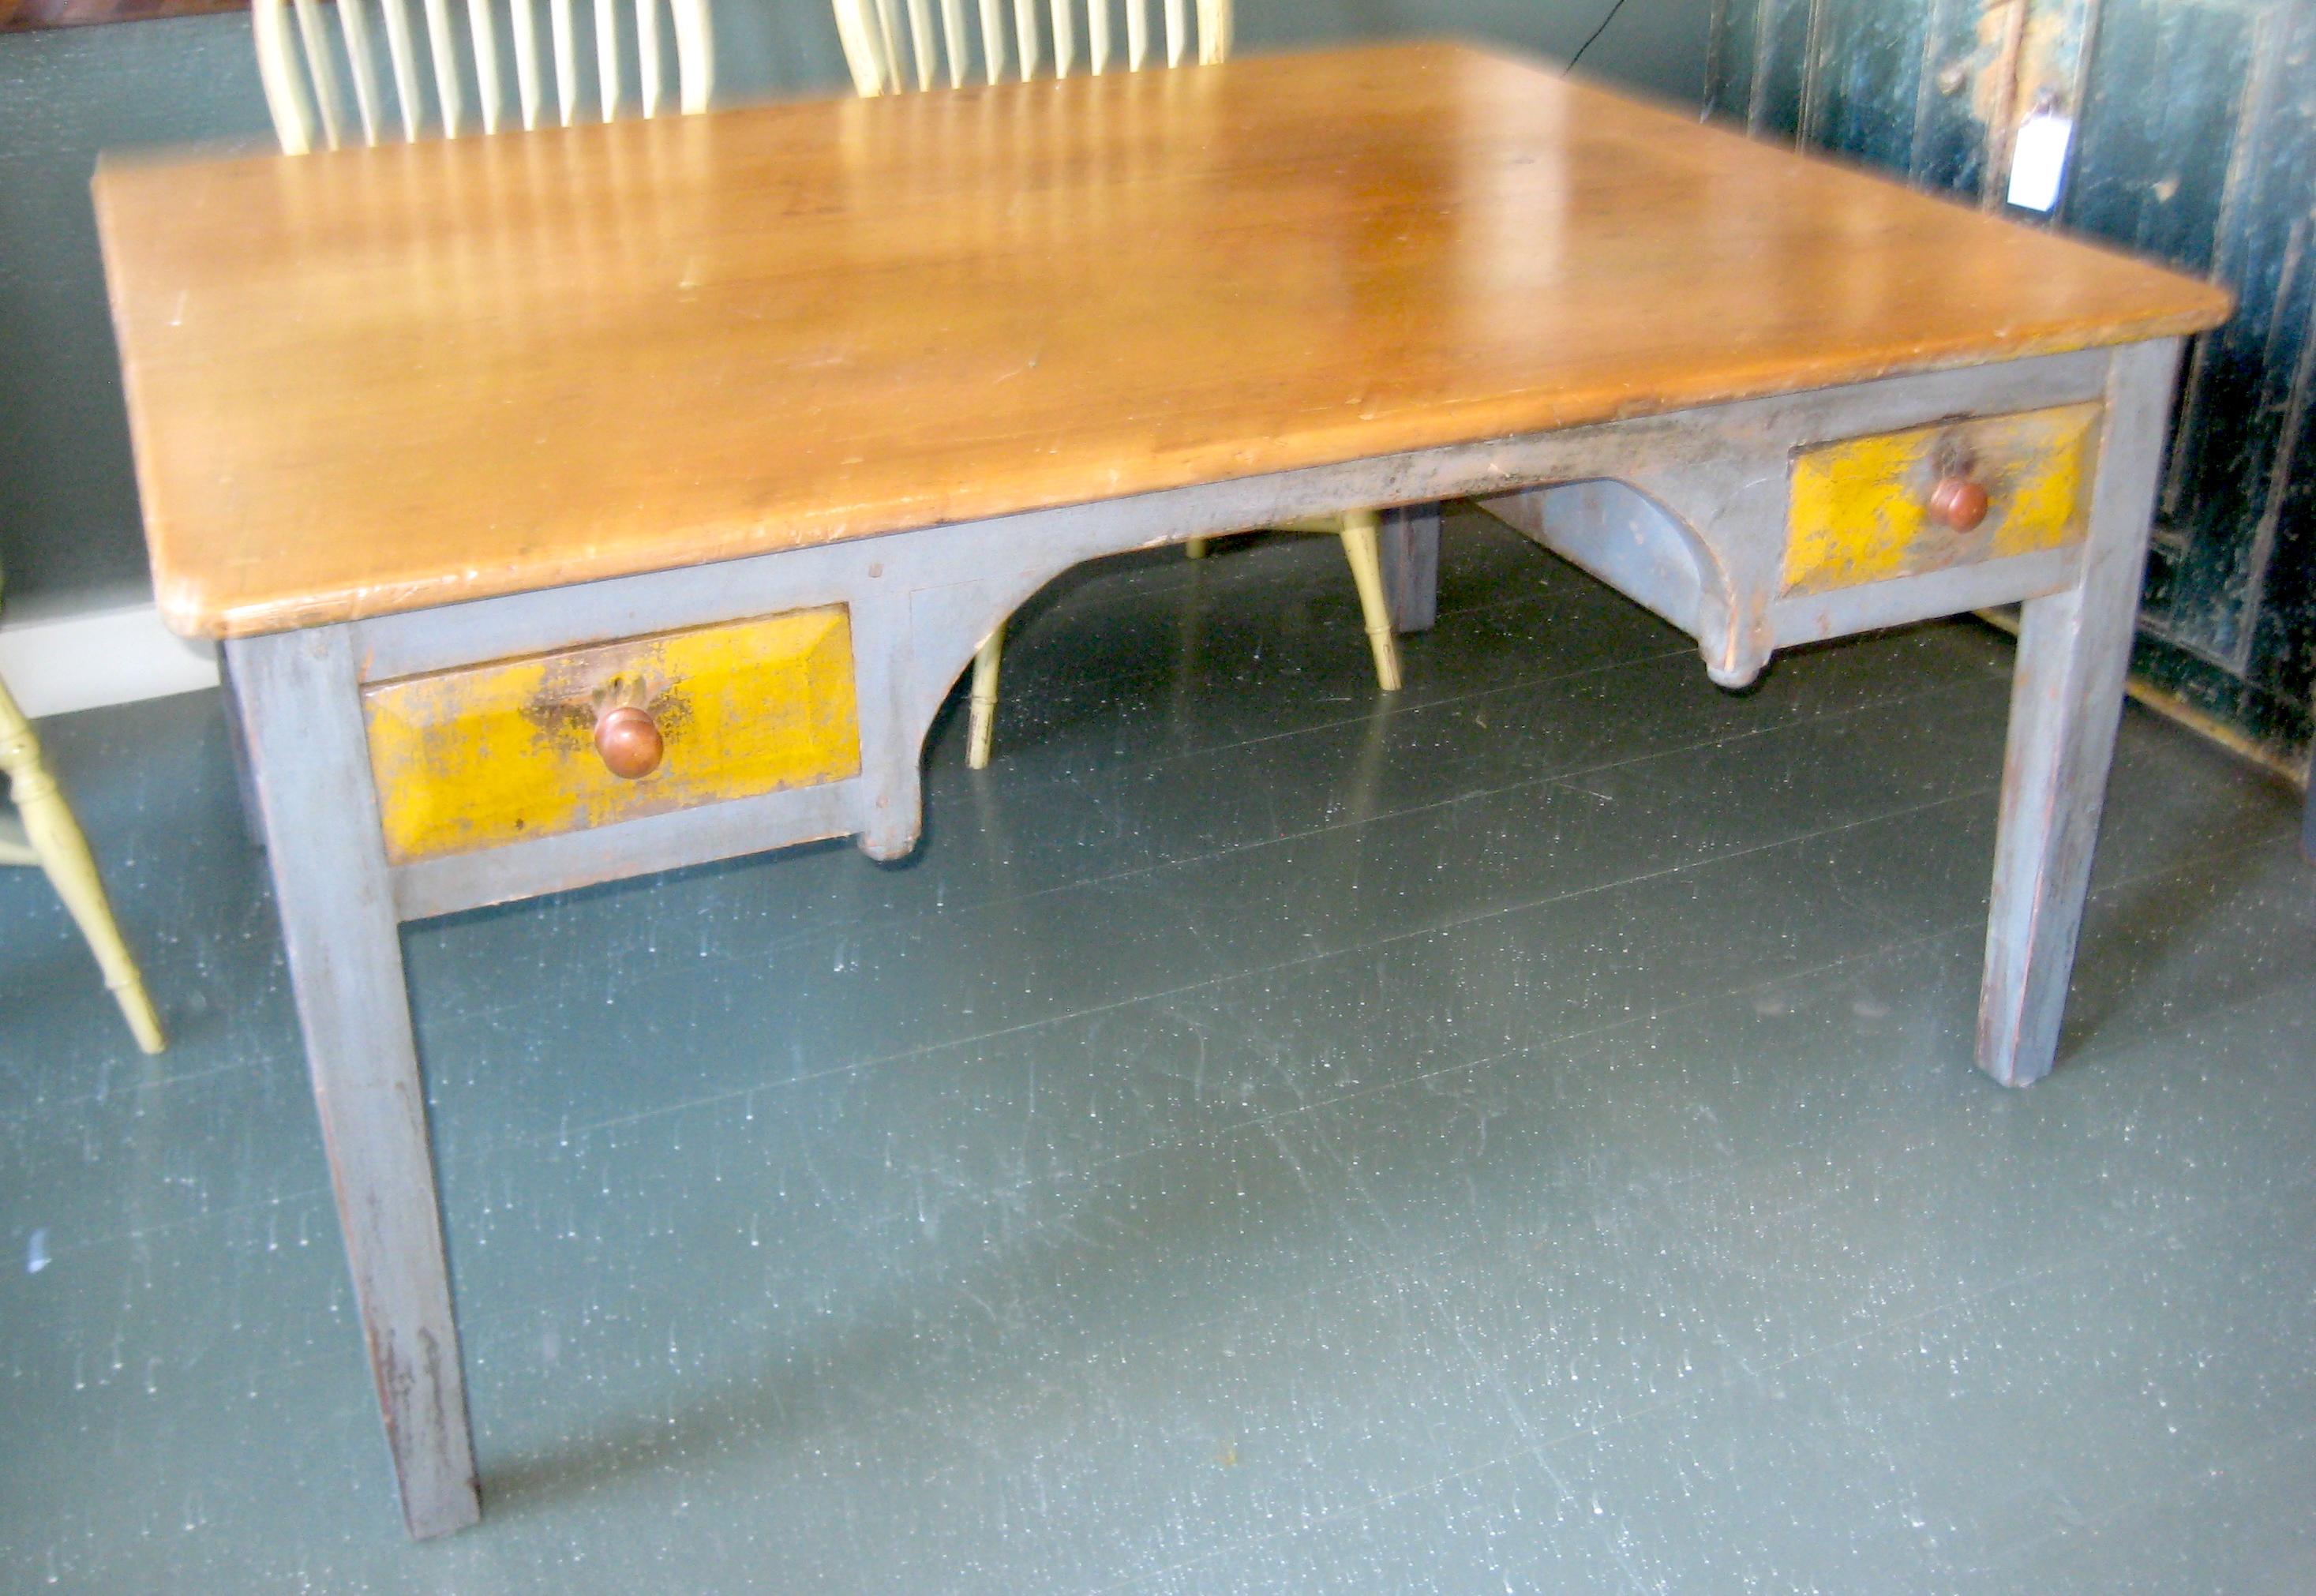 19th century desk table. Unpainted planked wood top, base in Original Grey Paint with Ocher painted drawers and Red painted knob pulls on one side. Other side with later kneehole cutout converting to partner's desk.